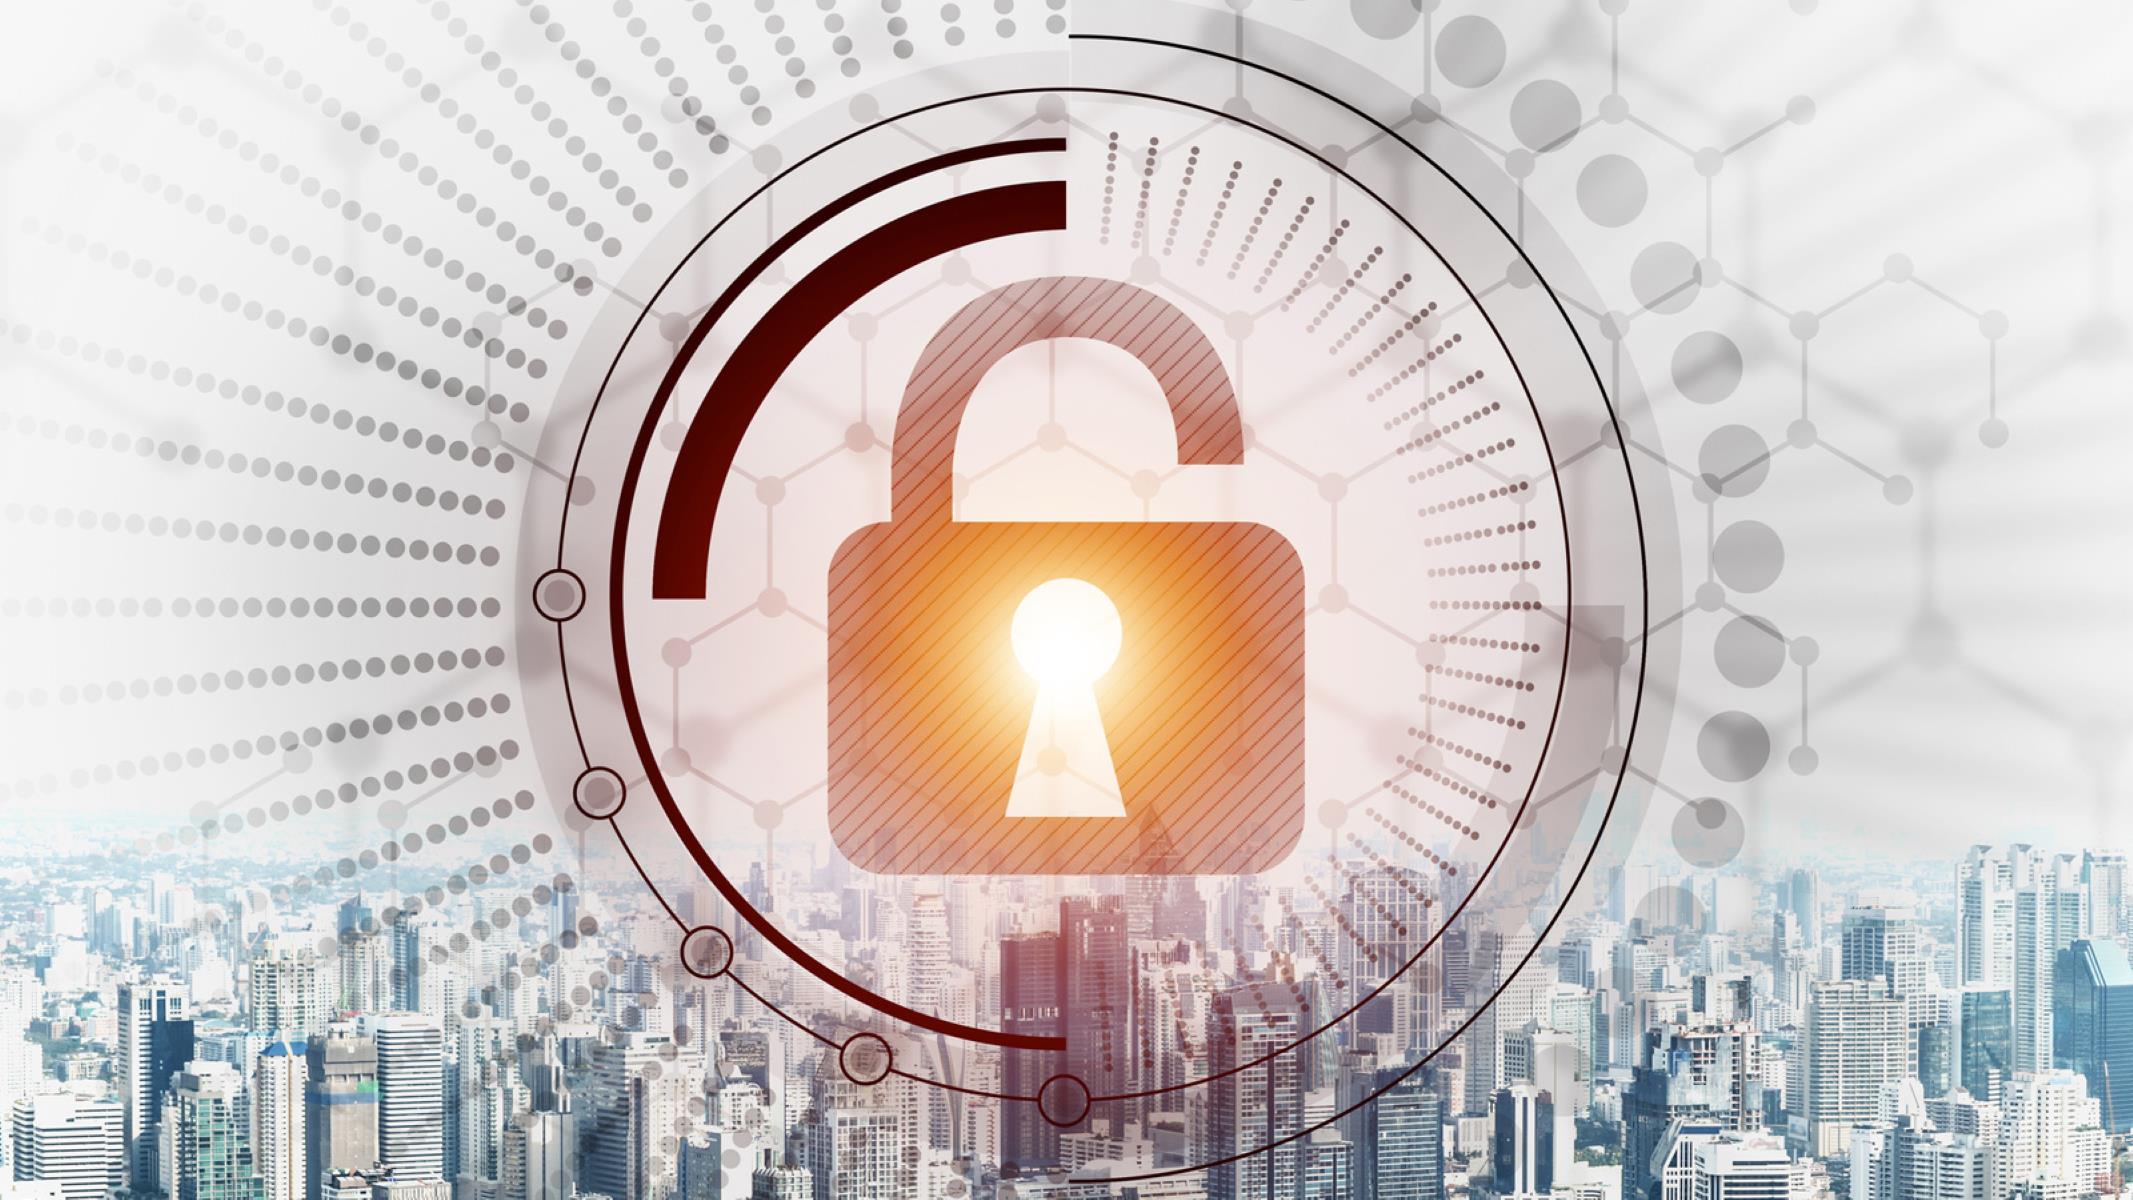 What Encryption Does Internet Of Things Use